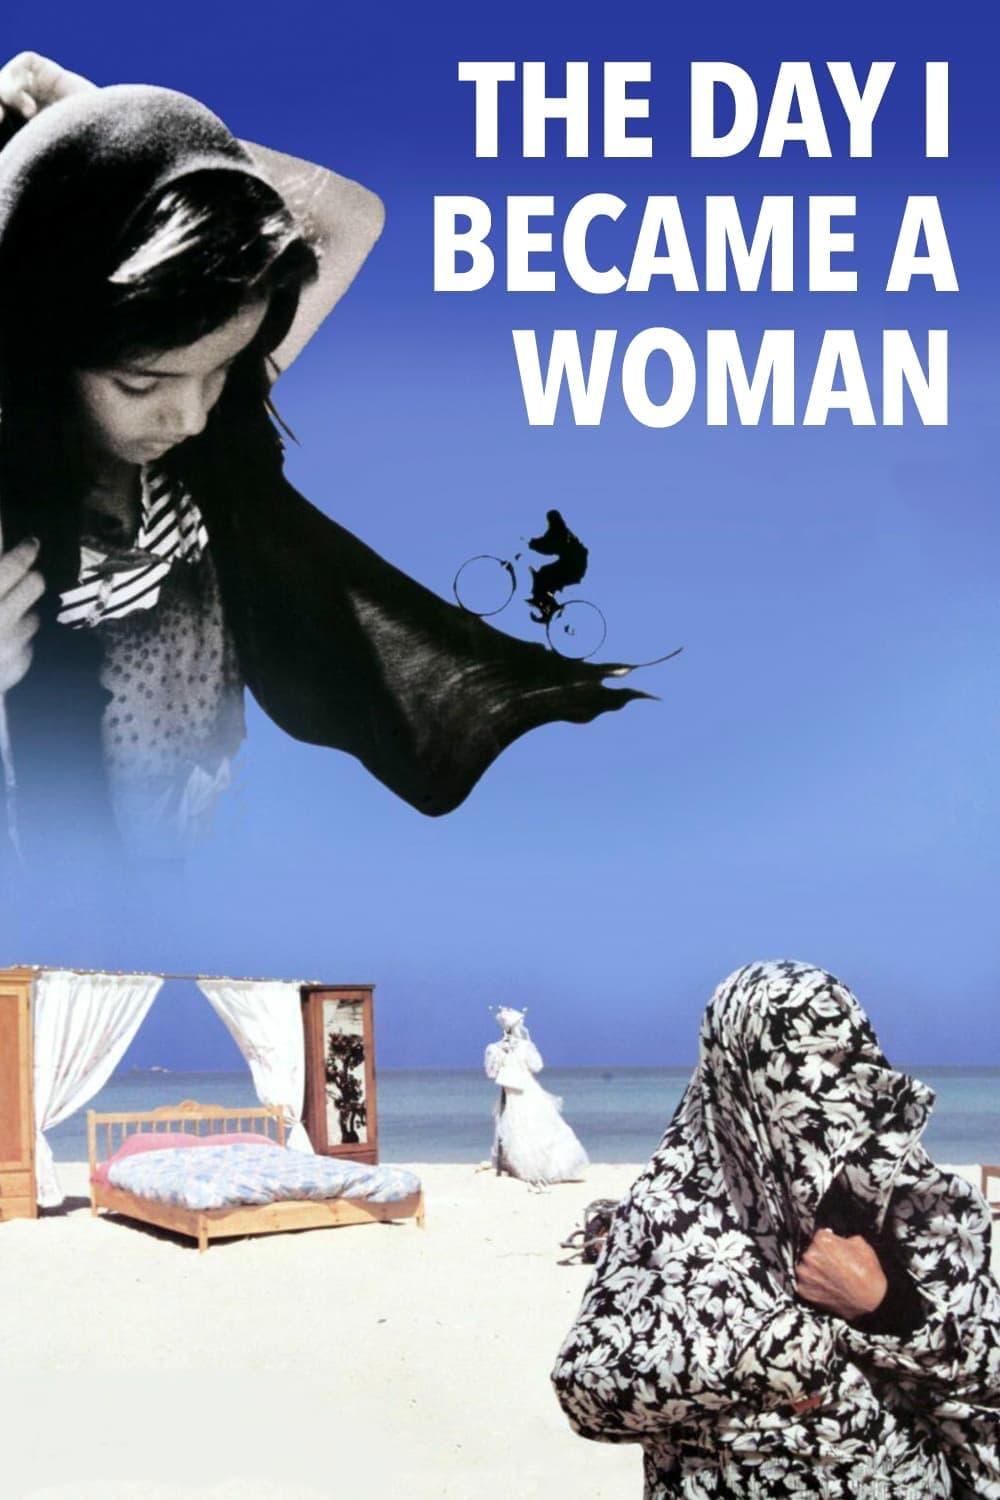 The Day I Became a Woman poster